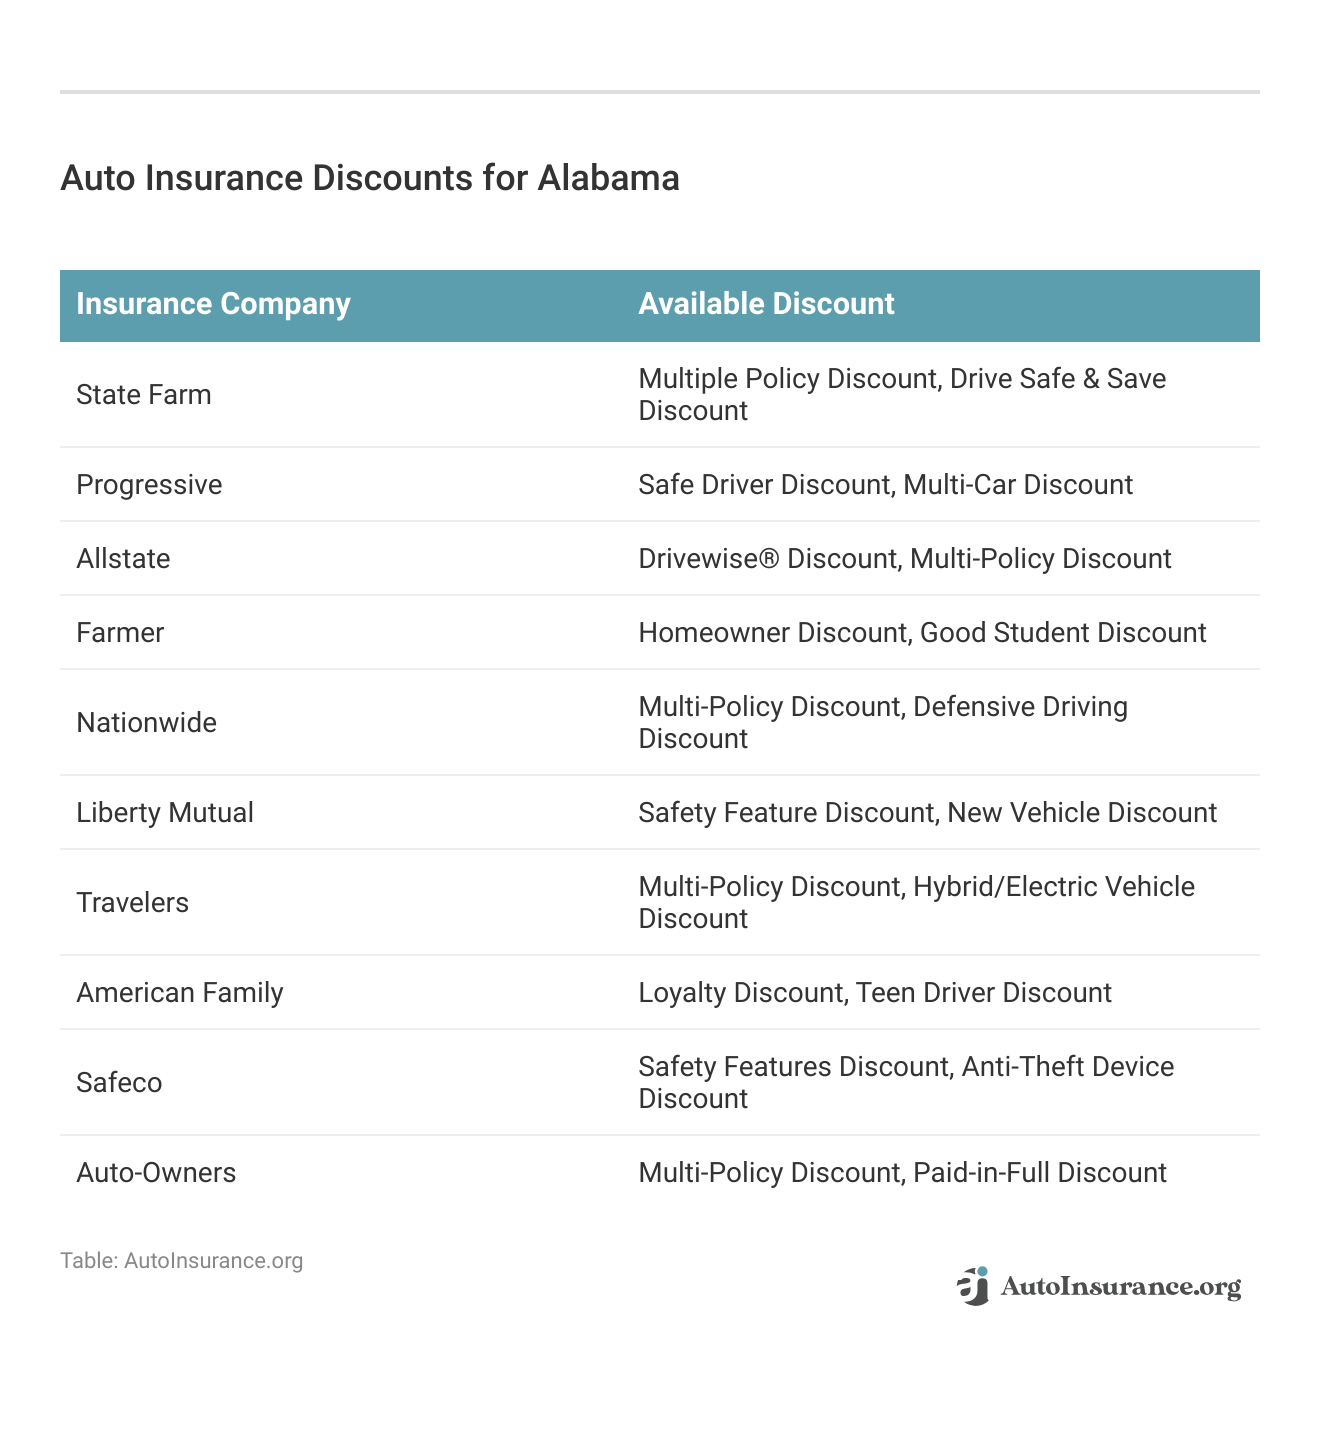 <h3>Auto Insurance Discounts for Alabama</h3>